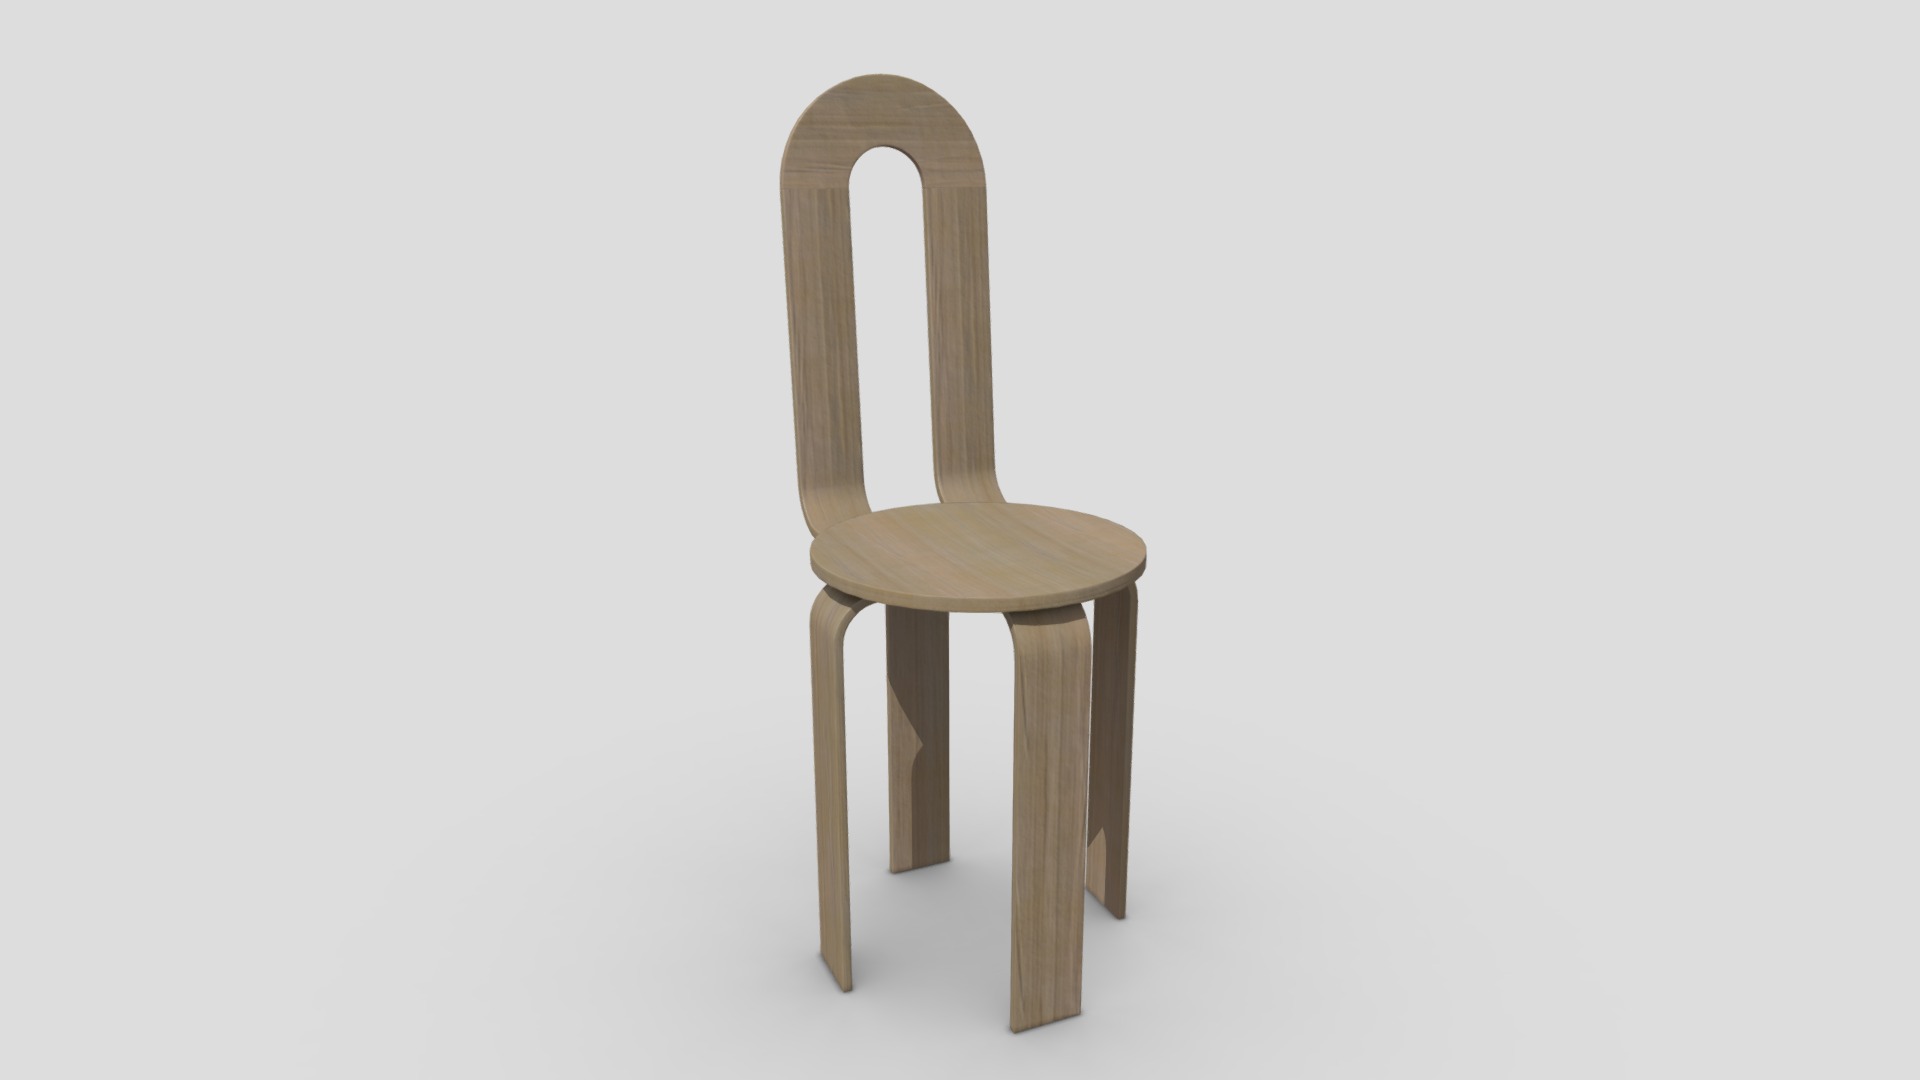 3D model Chair 3 - This is a 3D model of the Chair 3. The 3D model is about a wooden chair with a cushion.